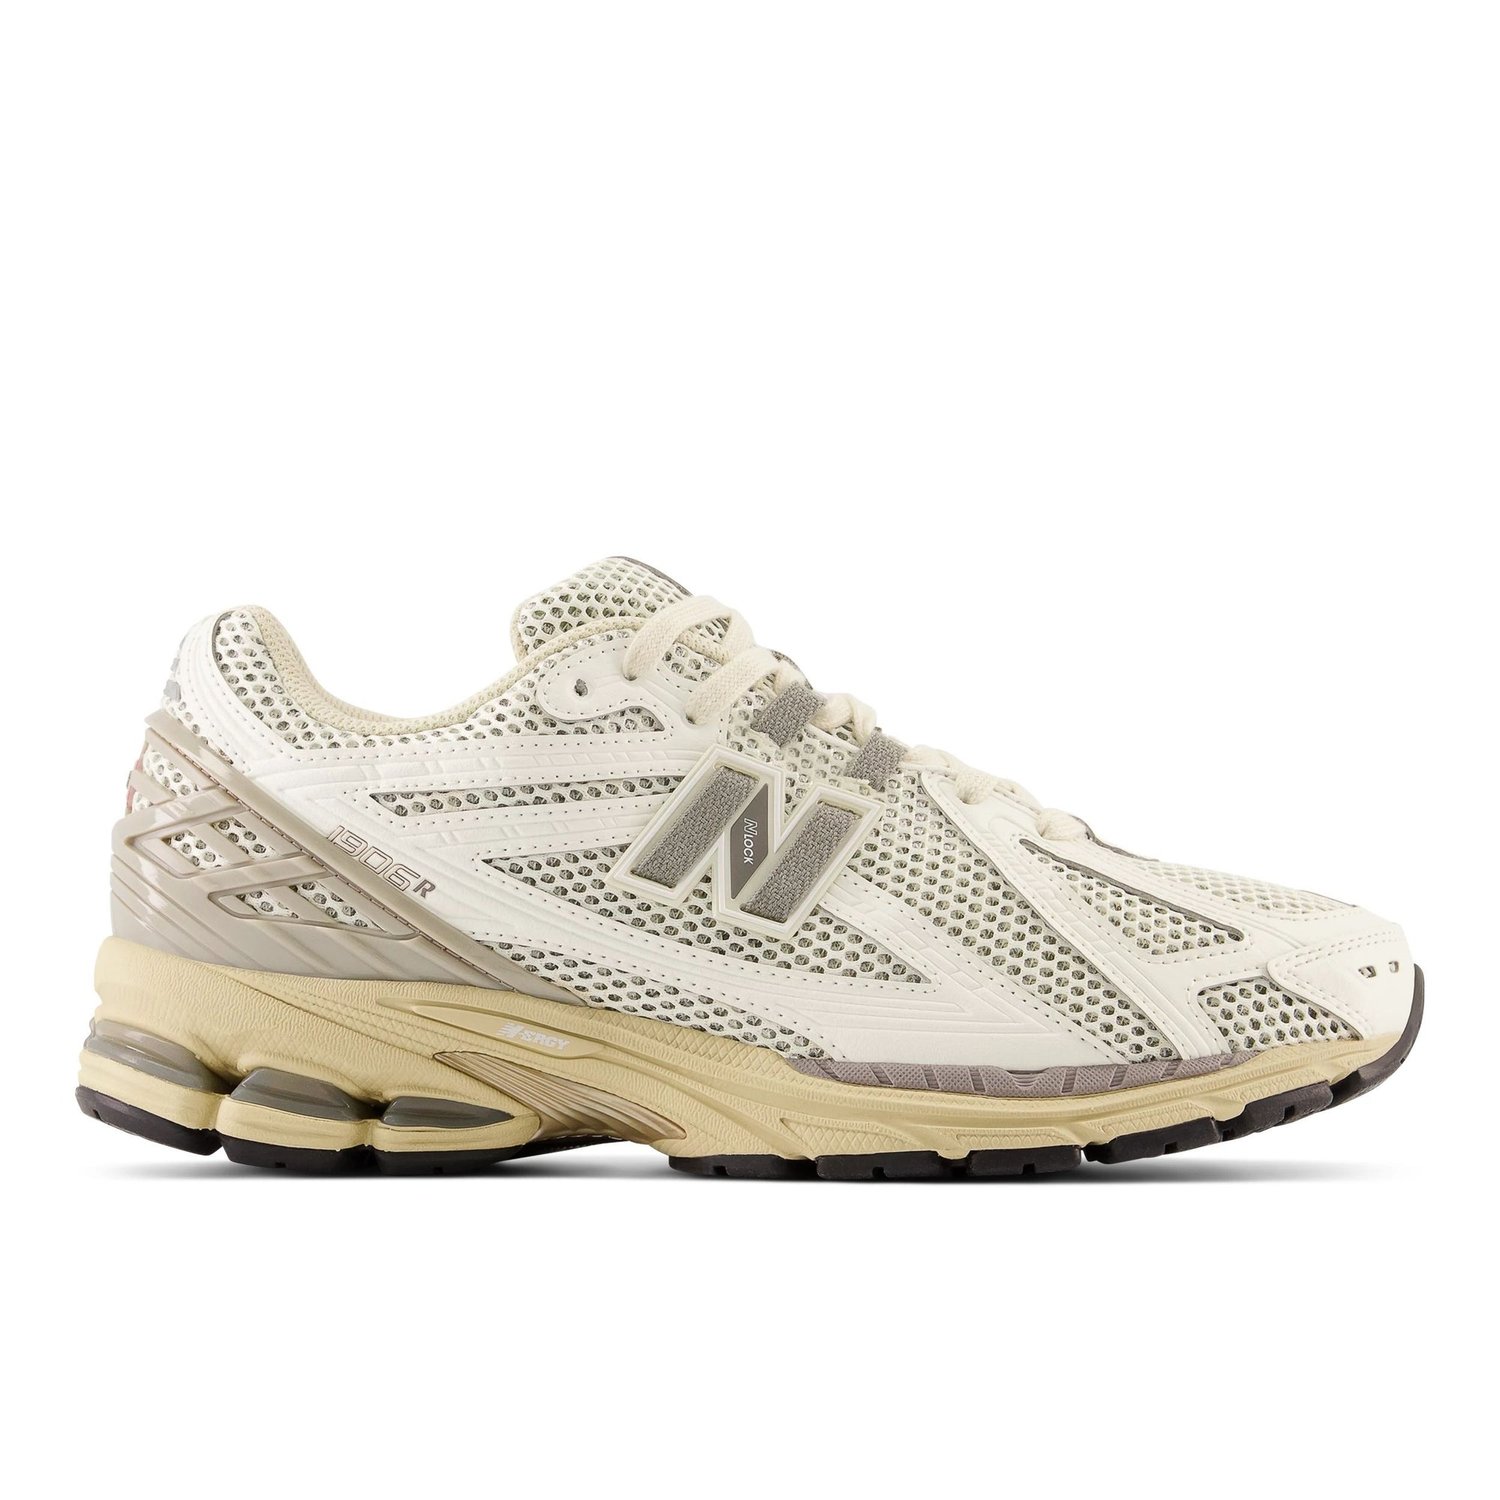 Now Available: New Balance 1906 